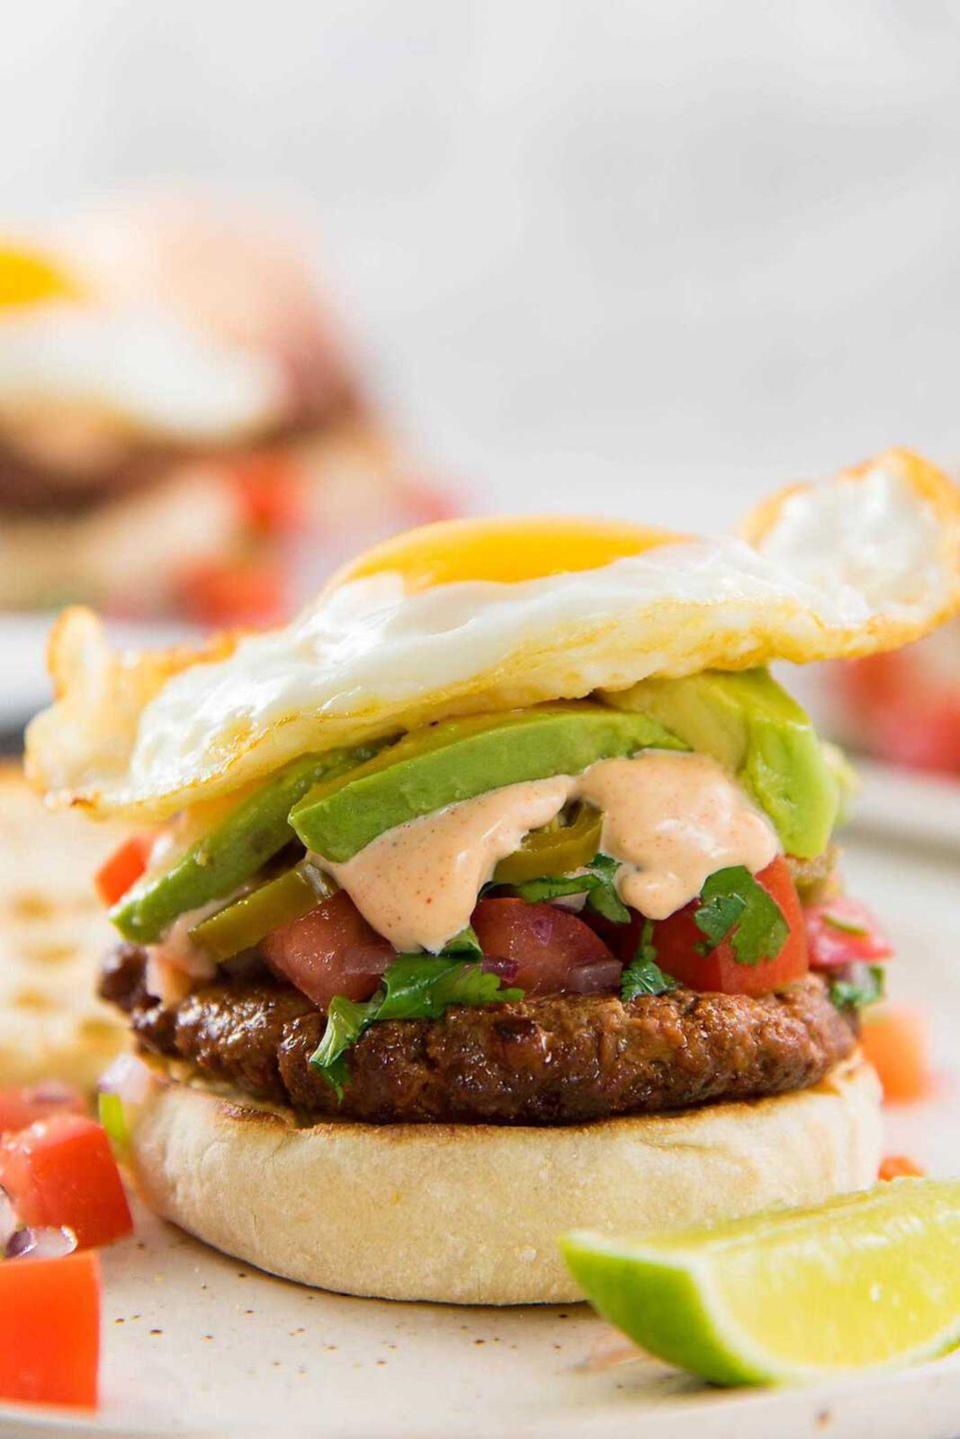 breakfast in bed breakfast chorizo burgers with fried egg avocado slices chipotle mayonnaise